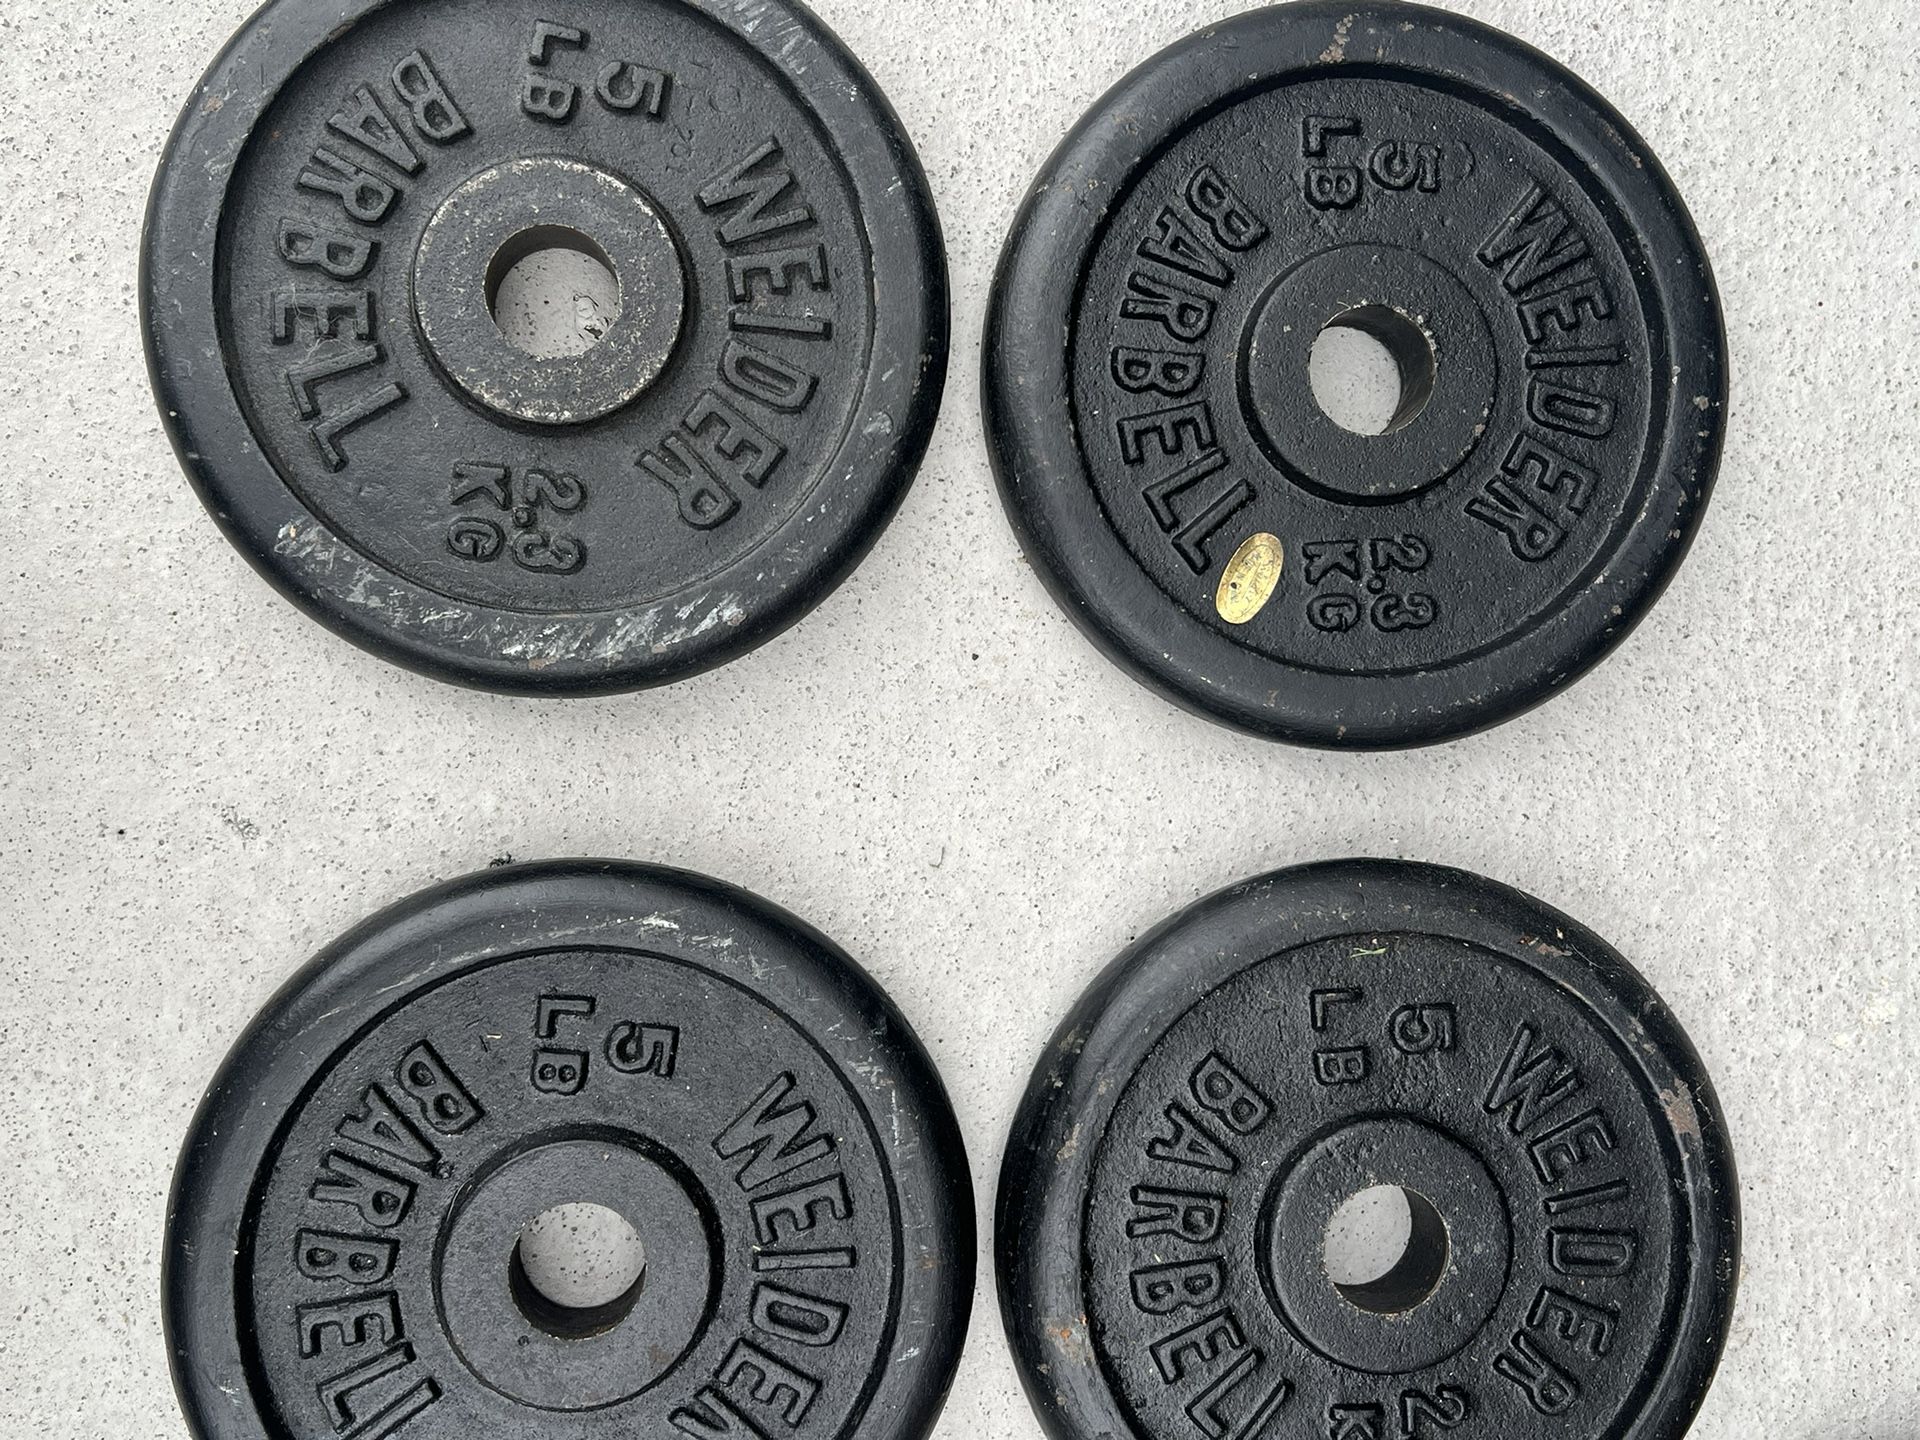  Lot of 4 WEIDER 5 lb Barbell Weights Plates Standard 1" Hole 20 lbs Total . Used in good condition with some cosmetic blemishes such as scratches and